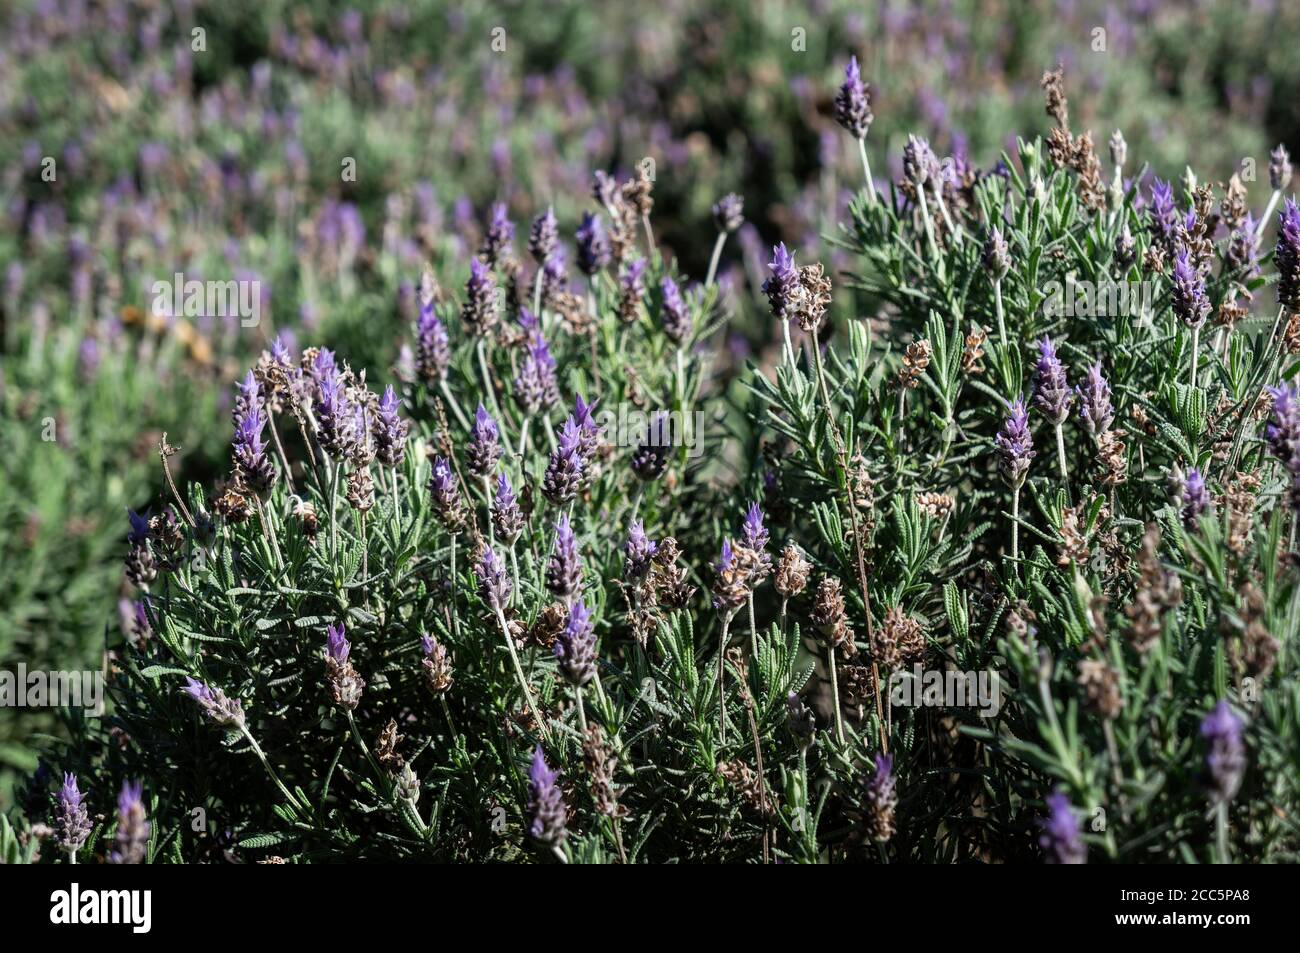 A bush of Lavender flowers (Lavandula dentata - a species of flowering plant in the family Lamiaceae) cultivated in the agriculture fields of Cunha. Stock Photo